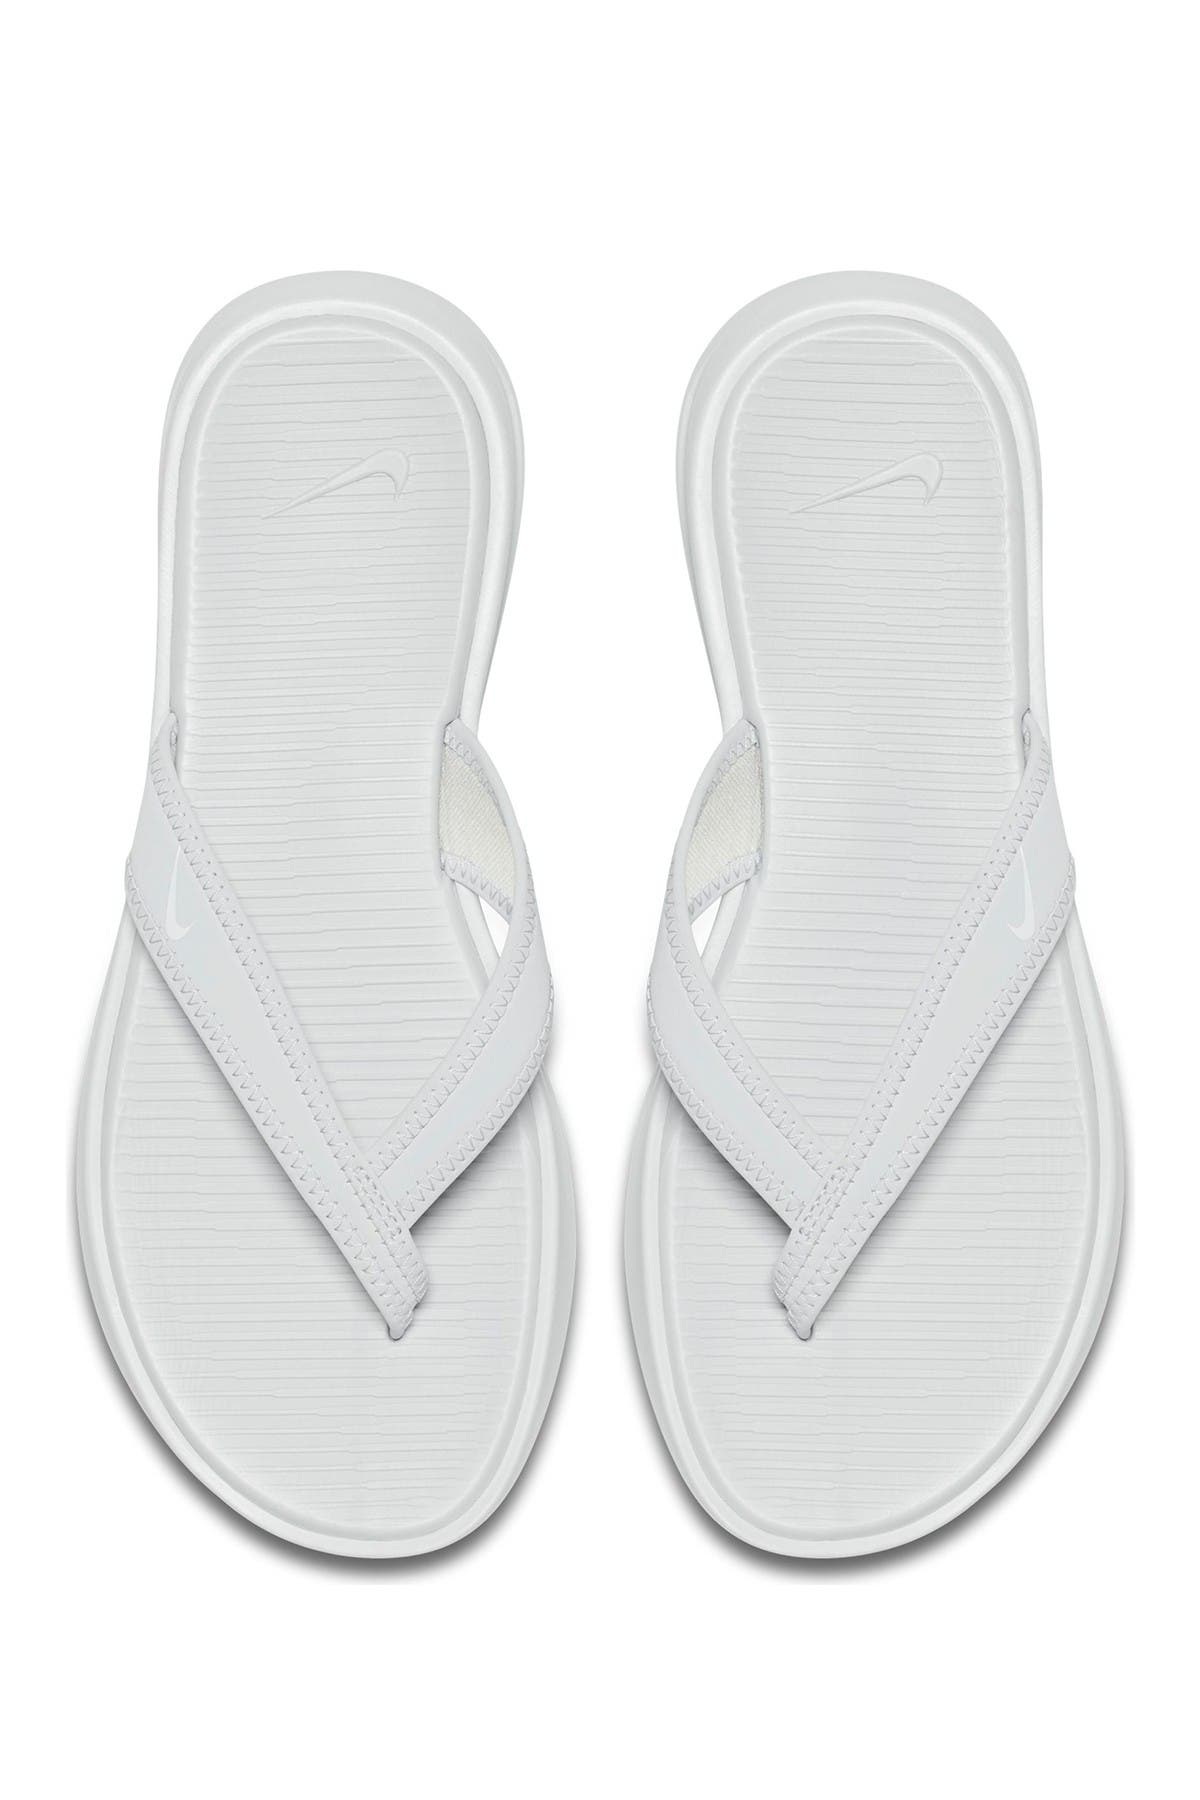 nike ultra celso thong flip flop